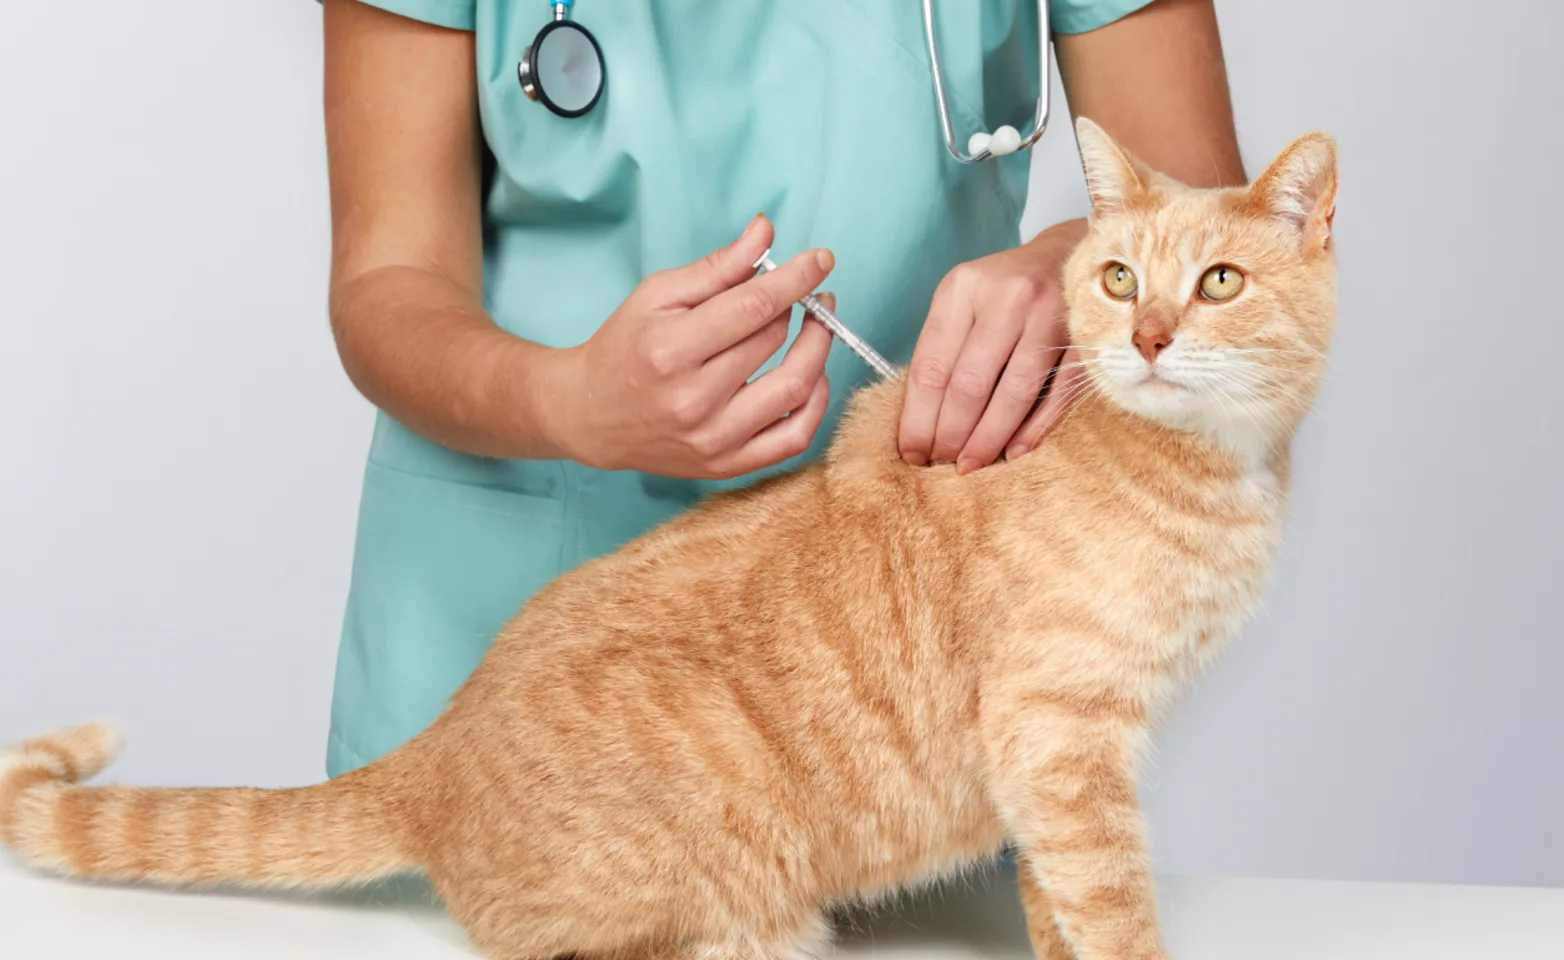 Cat receiving injection at clinic